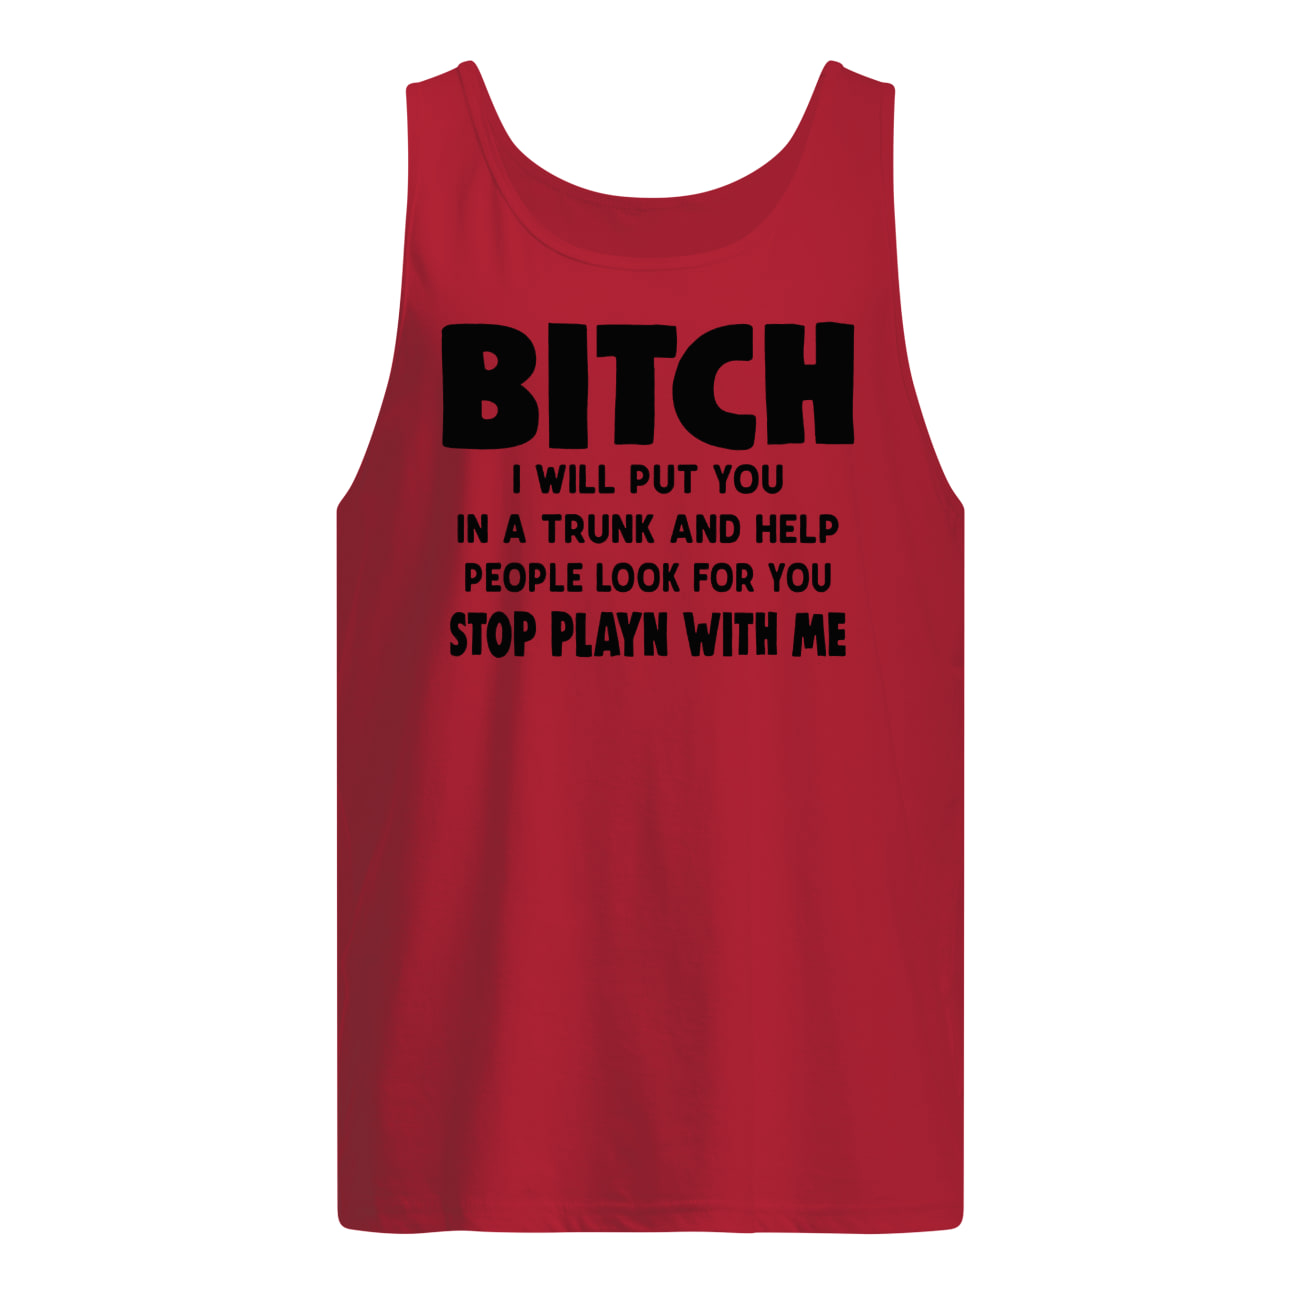 Bitch I will put you in the trunk and help people look for you stop playing with me tank top